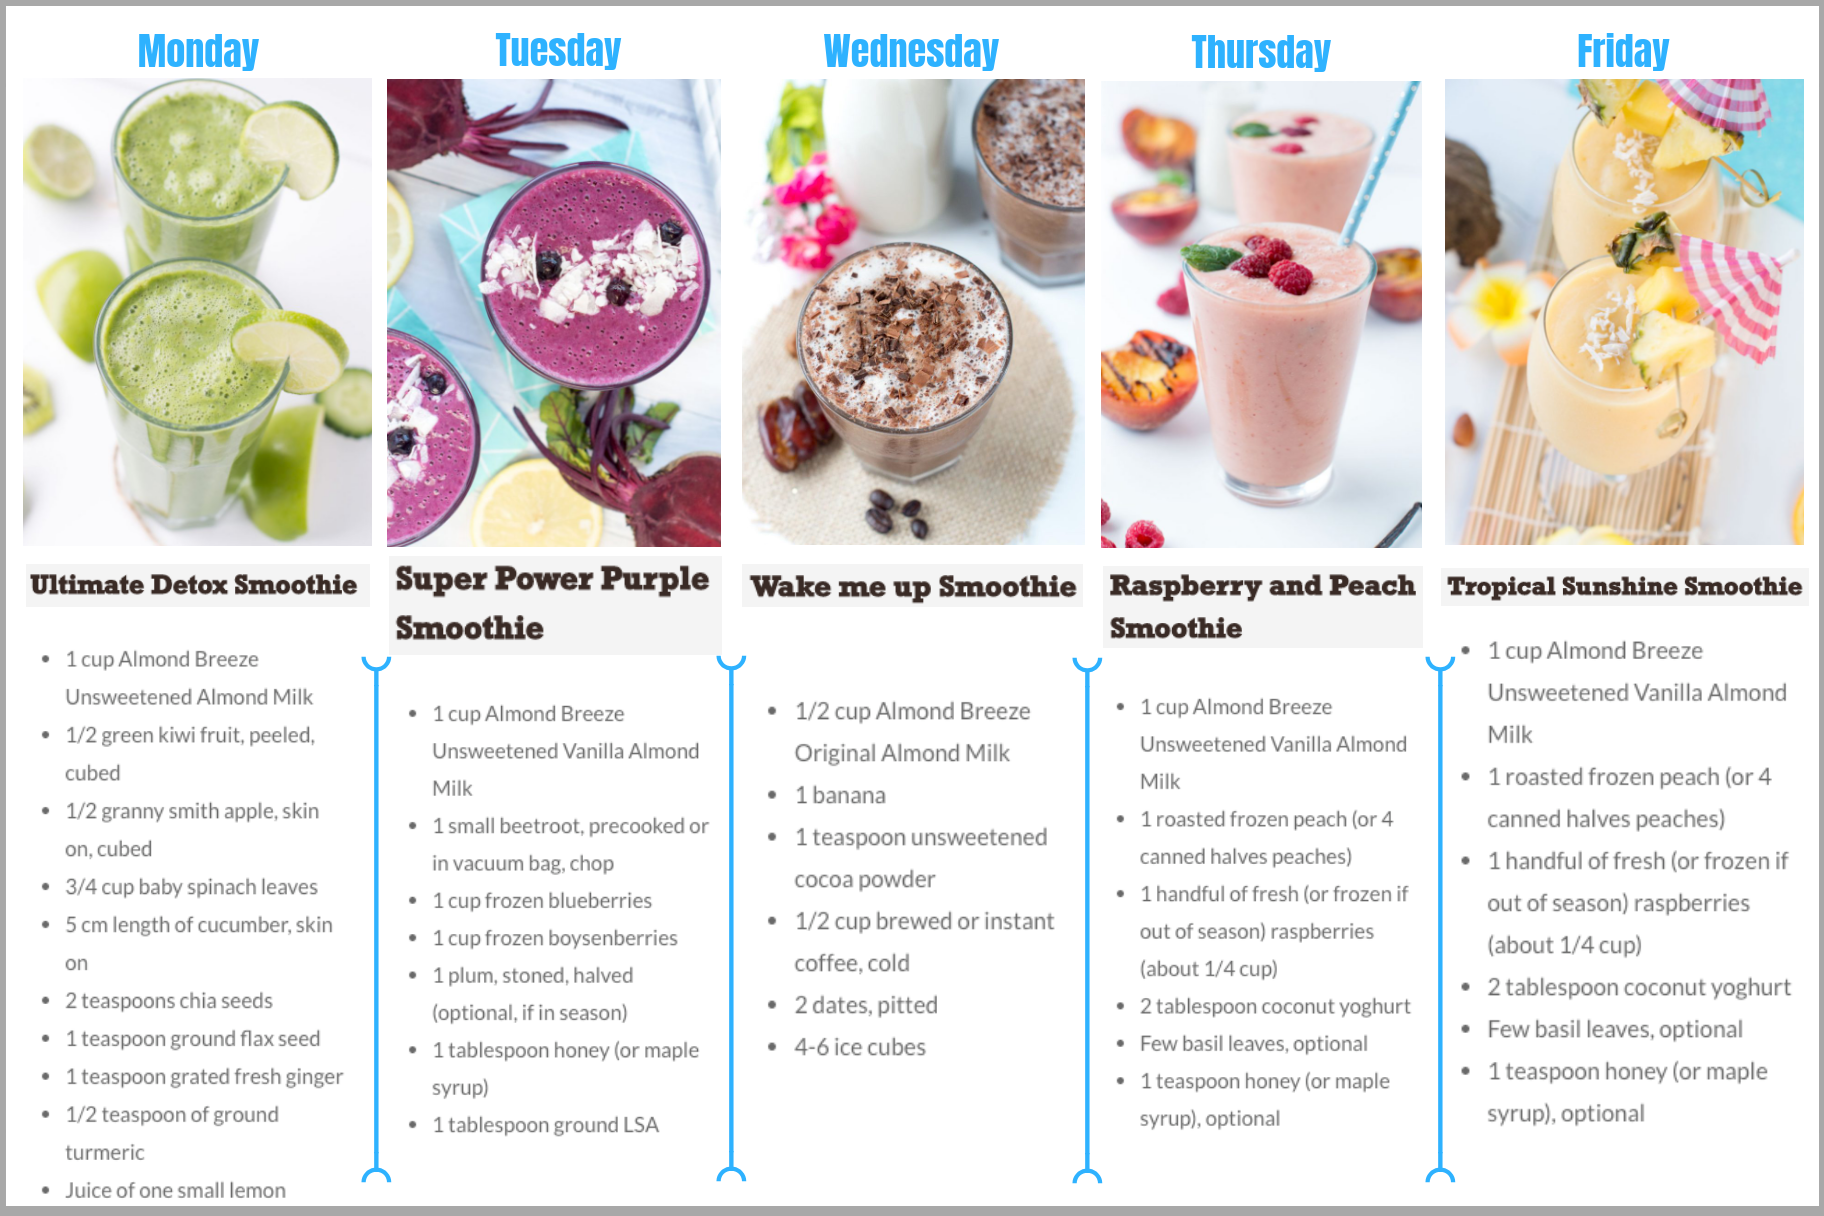 A smoothie a day keeps the doctor away PLUS free printable 5 day